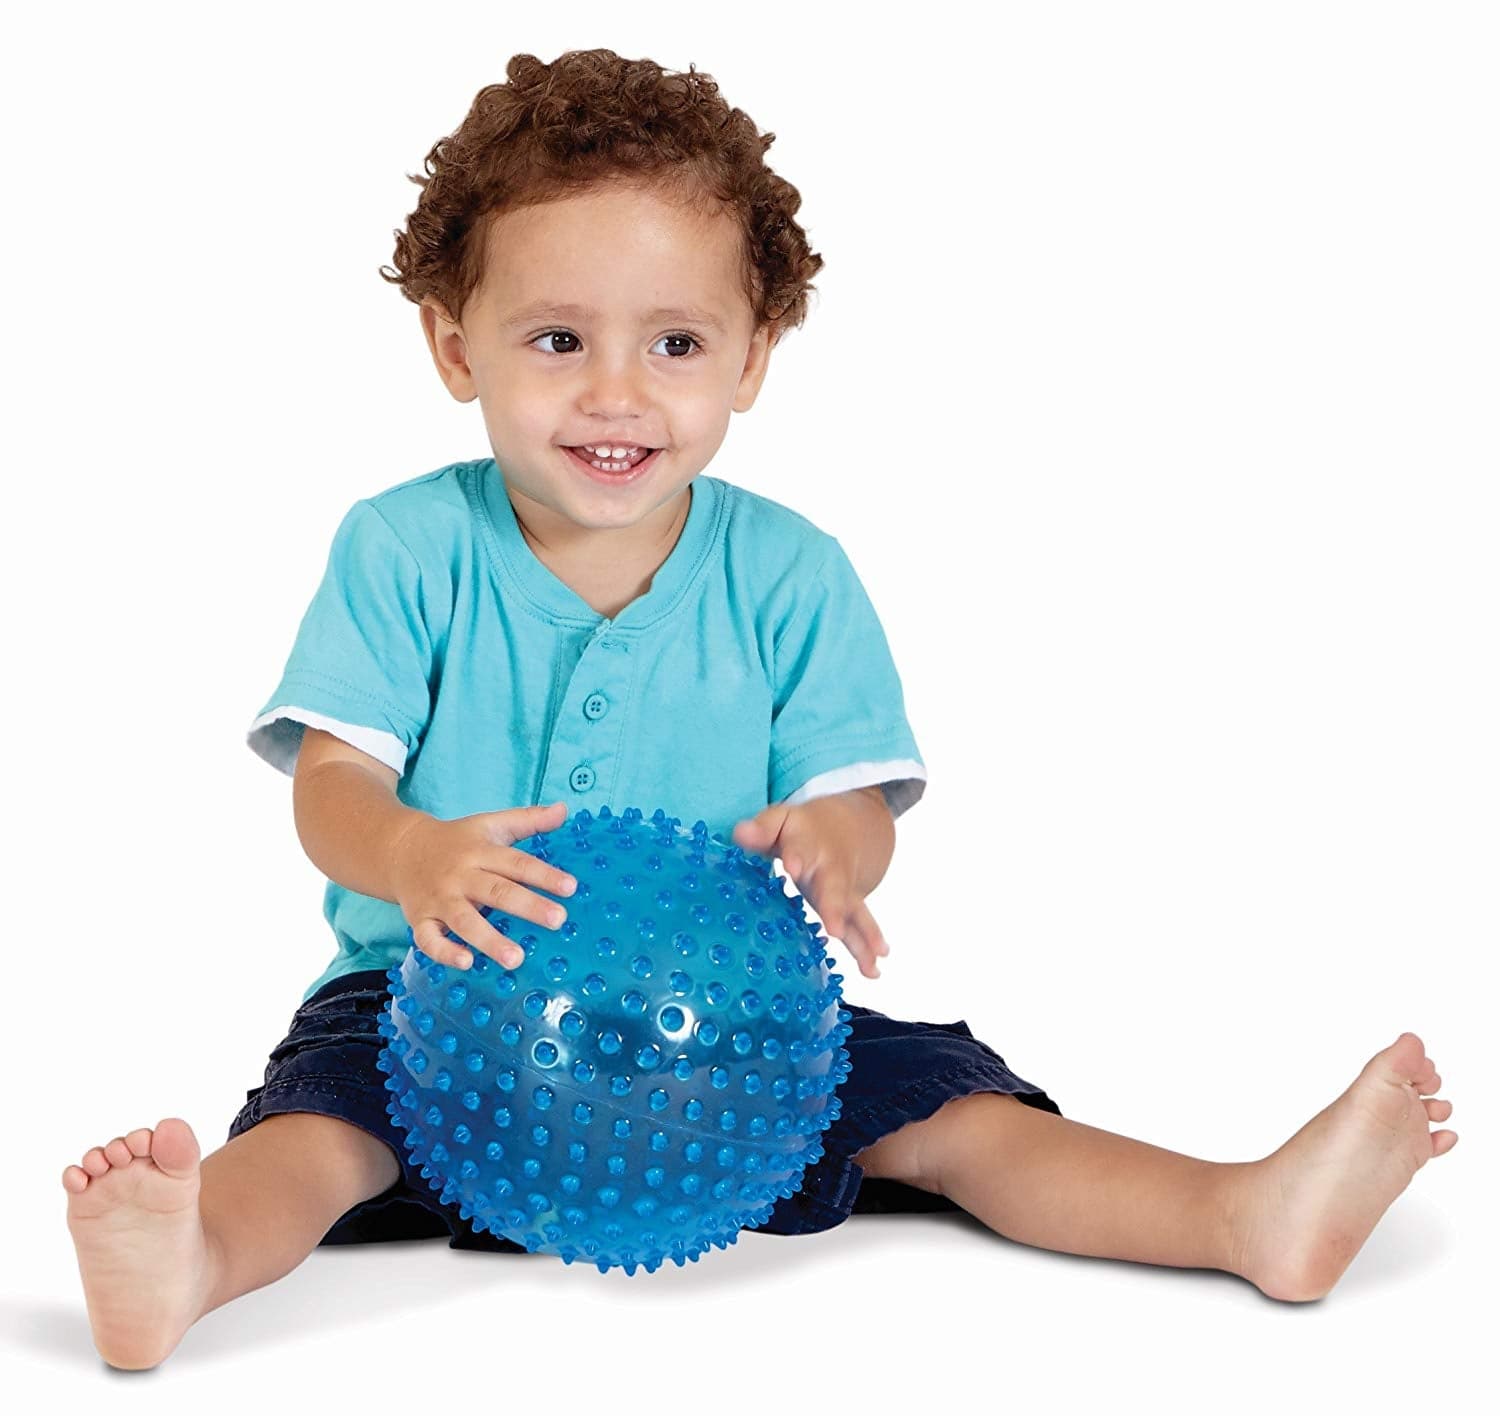 Edushape 18cm See Me Sensory Ball, The Edushape 18cm See Me Sensory Ball is very similar to Sensory Dot Ball apart from they have attractive translucent colours. The Edushape 18cm See Me Sensory Balls are great for you and/or your little one to play with and makes a perfect squidgy toy. The soft nubs on the Edushape 18cm See Me Sensory Ball are designed to give tactile stimulation when held or thrown by the user. The different colours are lovely and easy on the eyes and will visually stimulate you whilst de